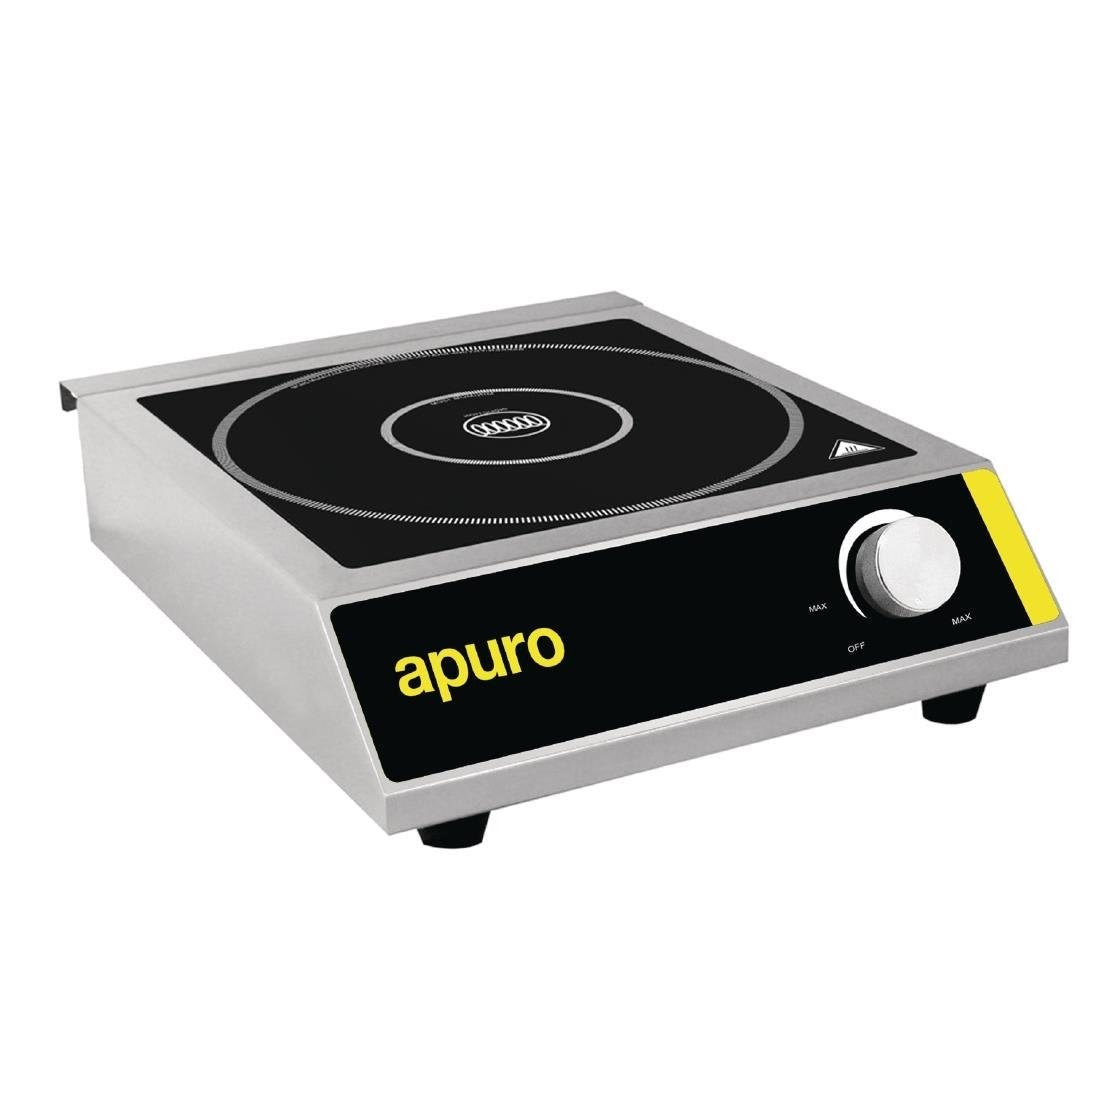 Apuro Induction Cooktop 3kW CE208-A Induction Cooking